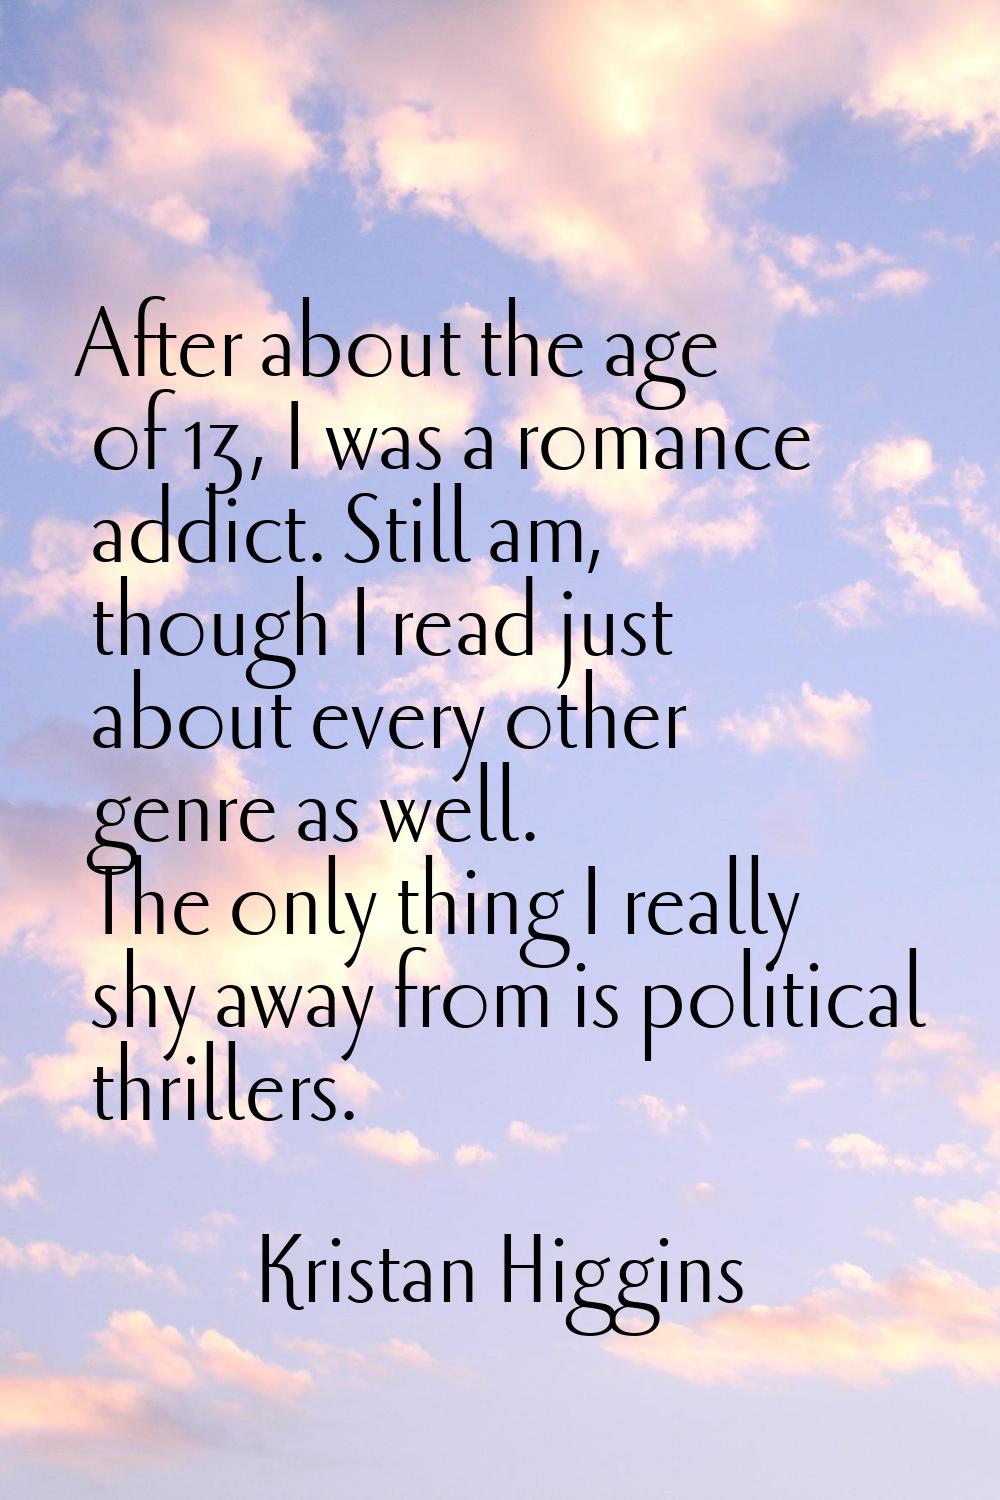 After about the age of 13, I was a romance addict. Still am, though I read just about every other g